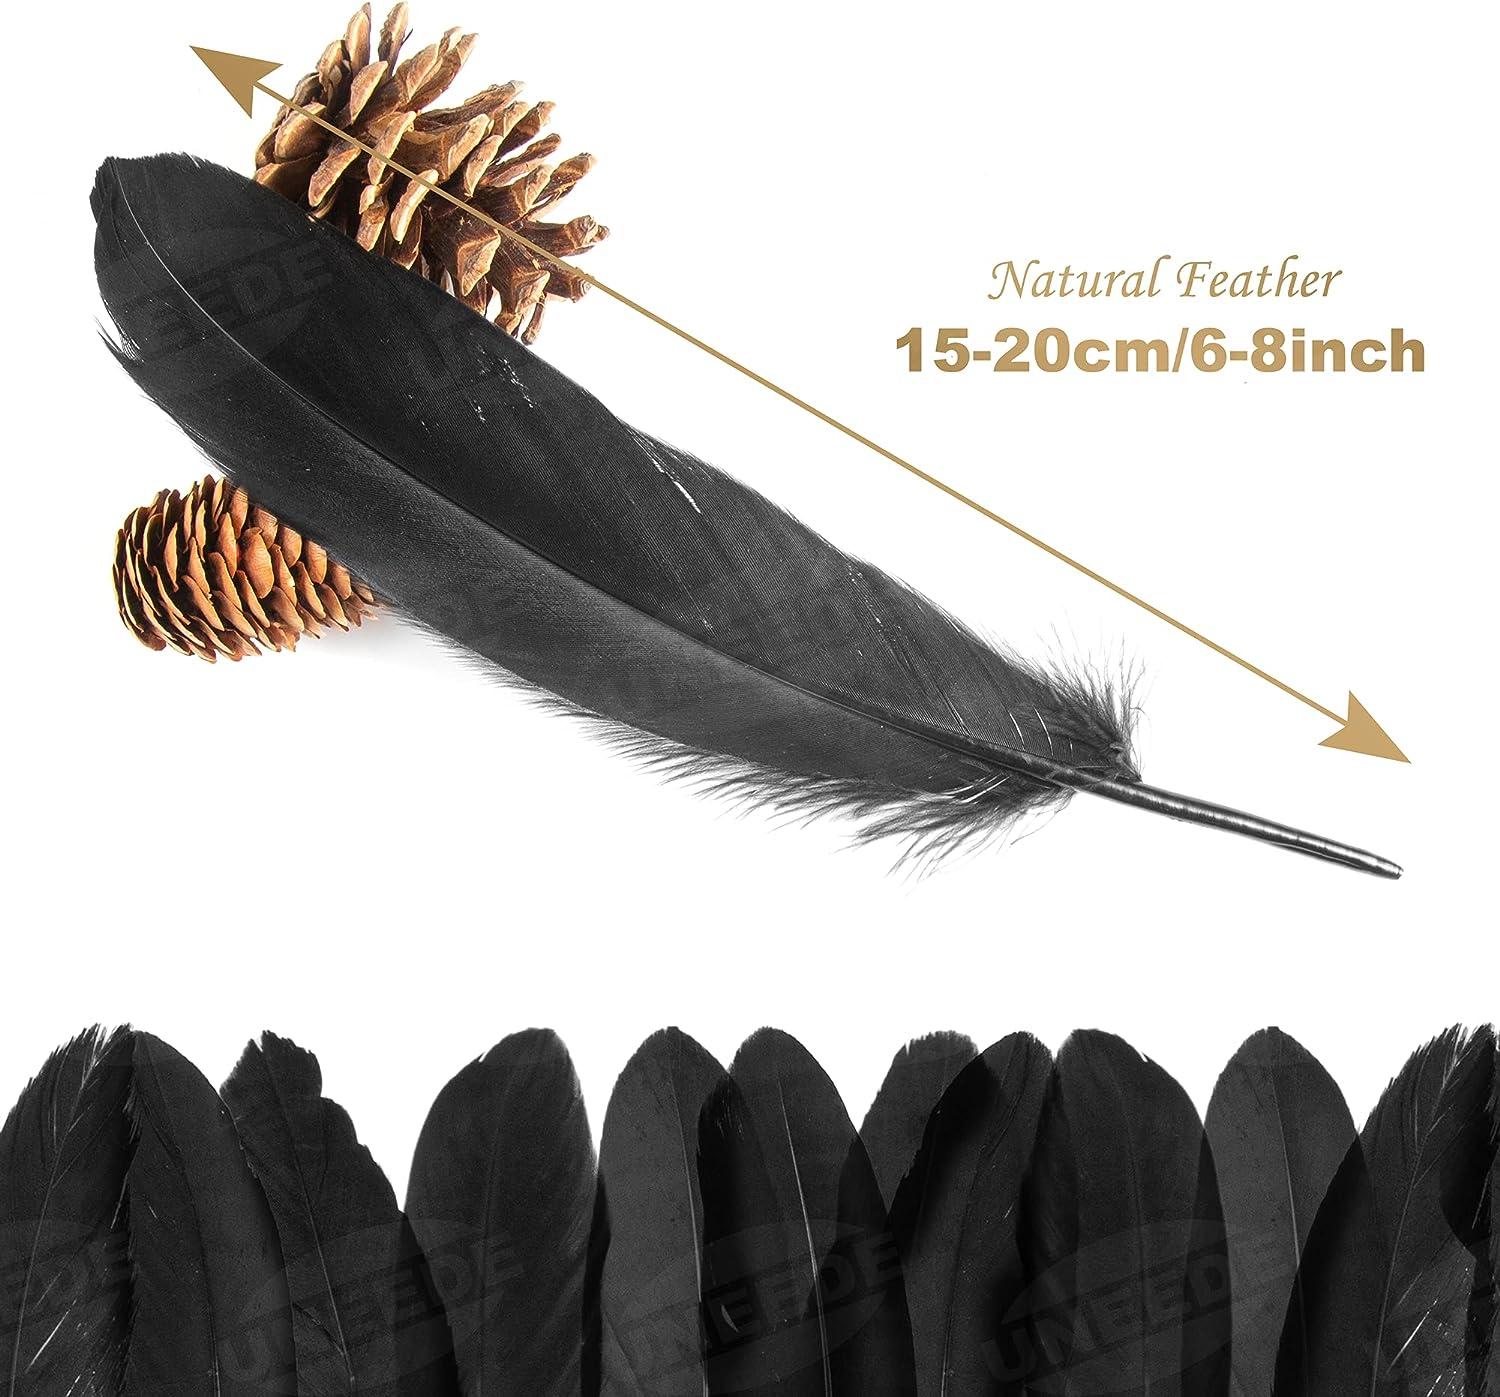  Ballinger Black Craft Feathers Bulk - 120Pcs 6-8 Inch Real  Goose Feathers for DIY Halloween Decorations, Jewelry,Cosplay and Clothing  Accessories : Arts, Crafts & Sewing